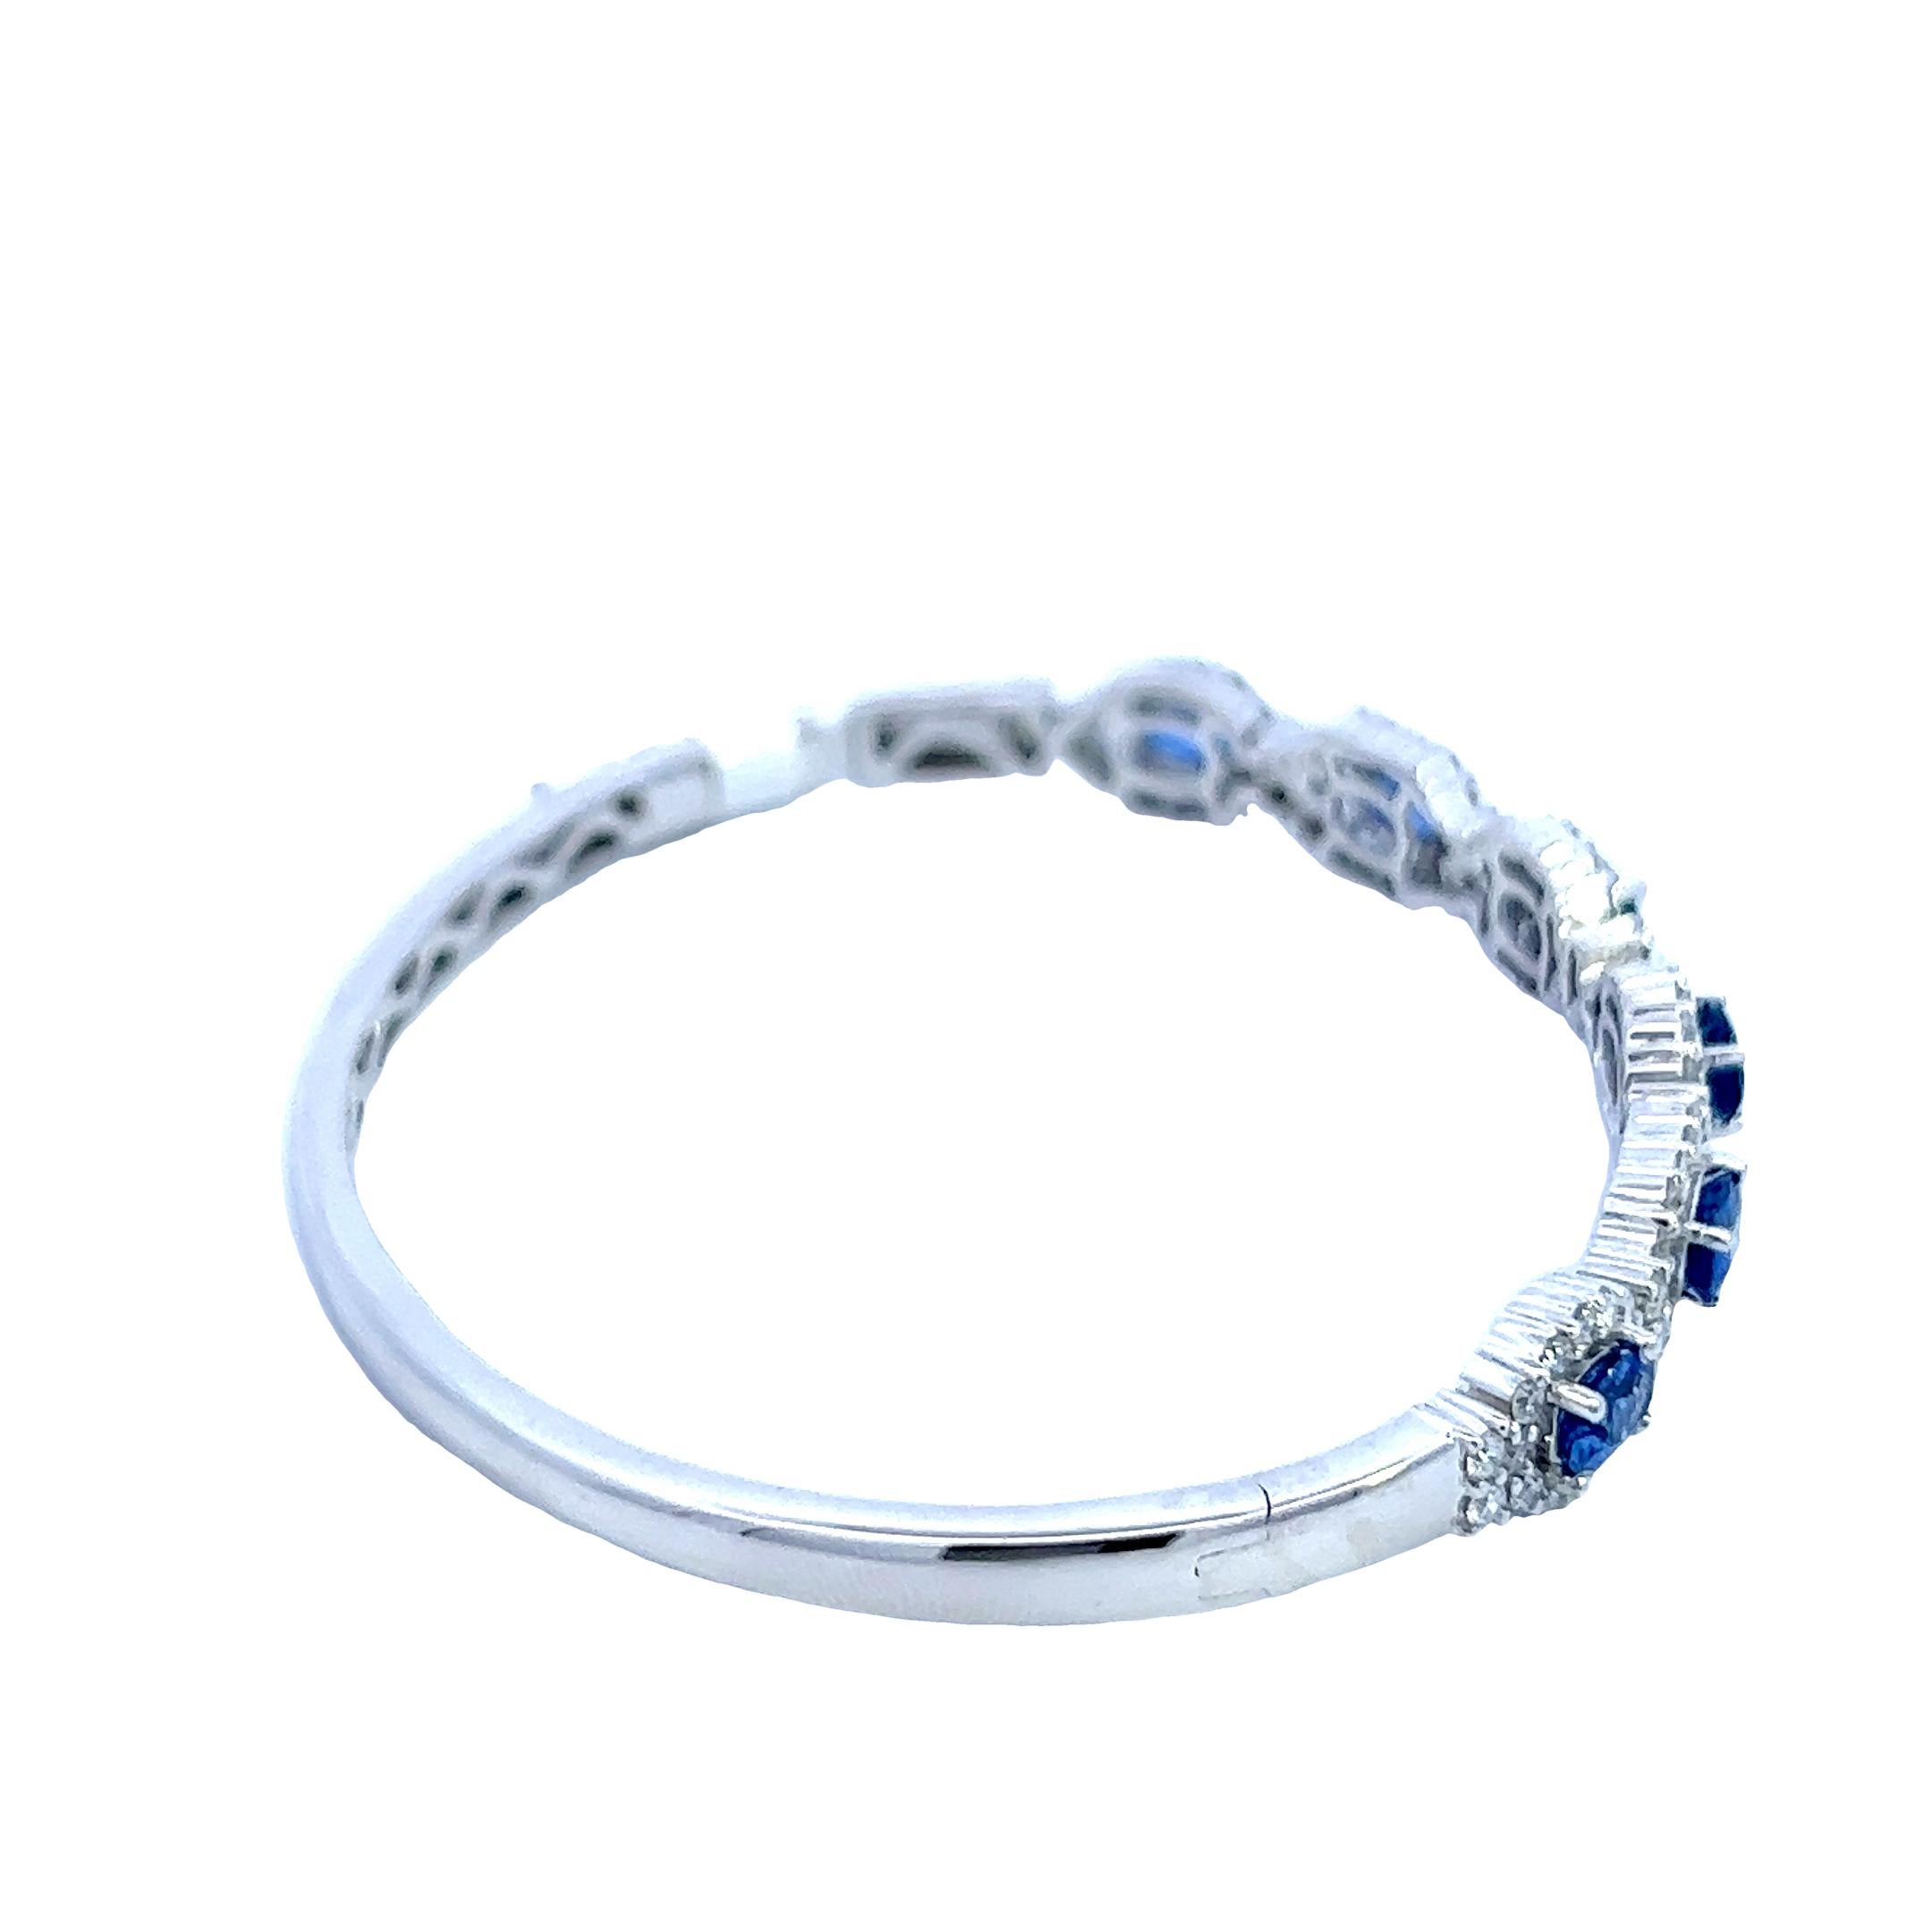 Adorn your wrist with the epitome of sophistication - an exquisite 3.03-carat oval natural sapphire bangle bracelet, meticulously designed in gleaming 14k white gold. The centerpiece of this bracelet is a mesmerizing 6x4mm natural sapphire, known